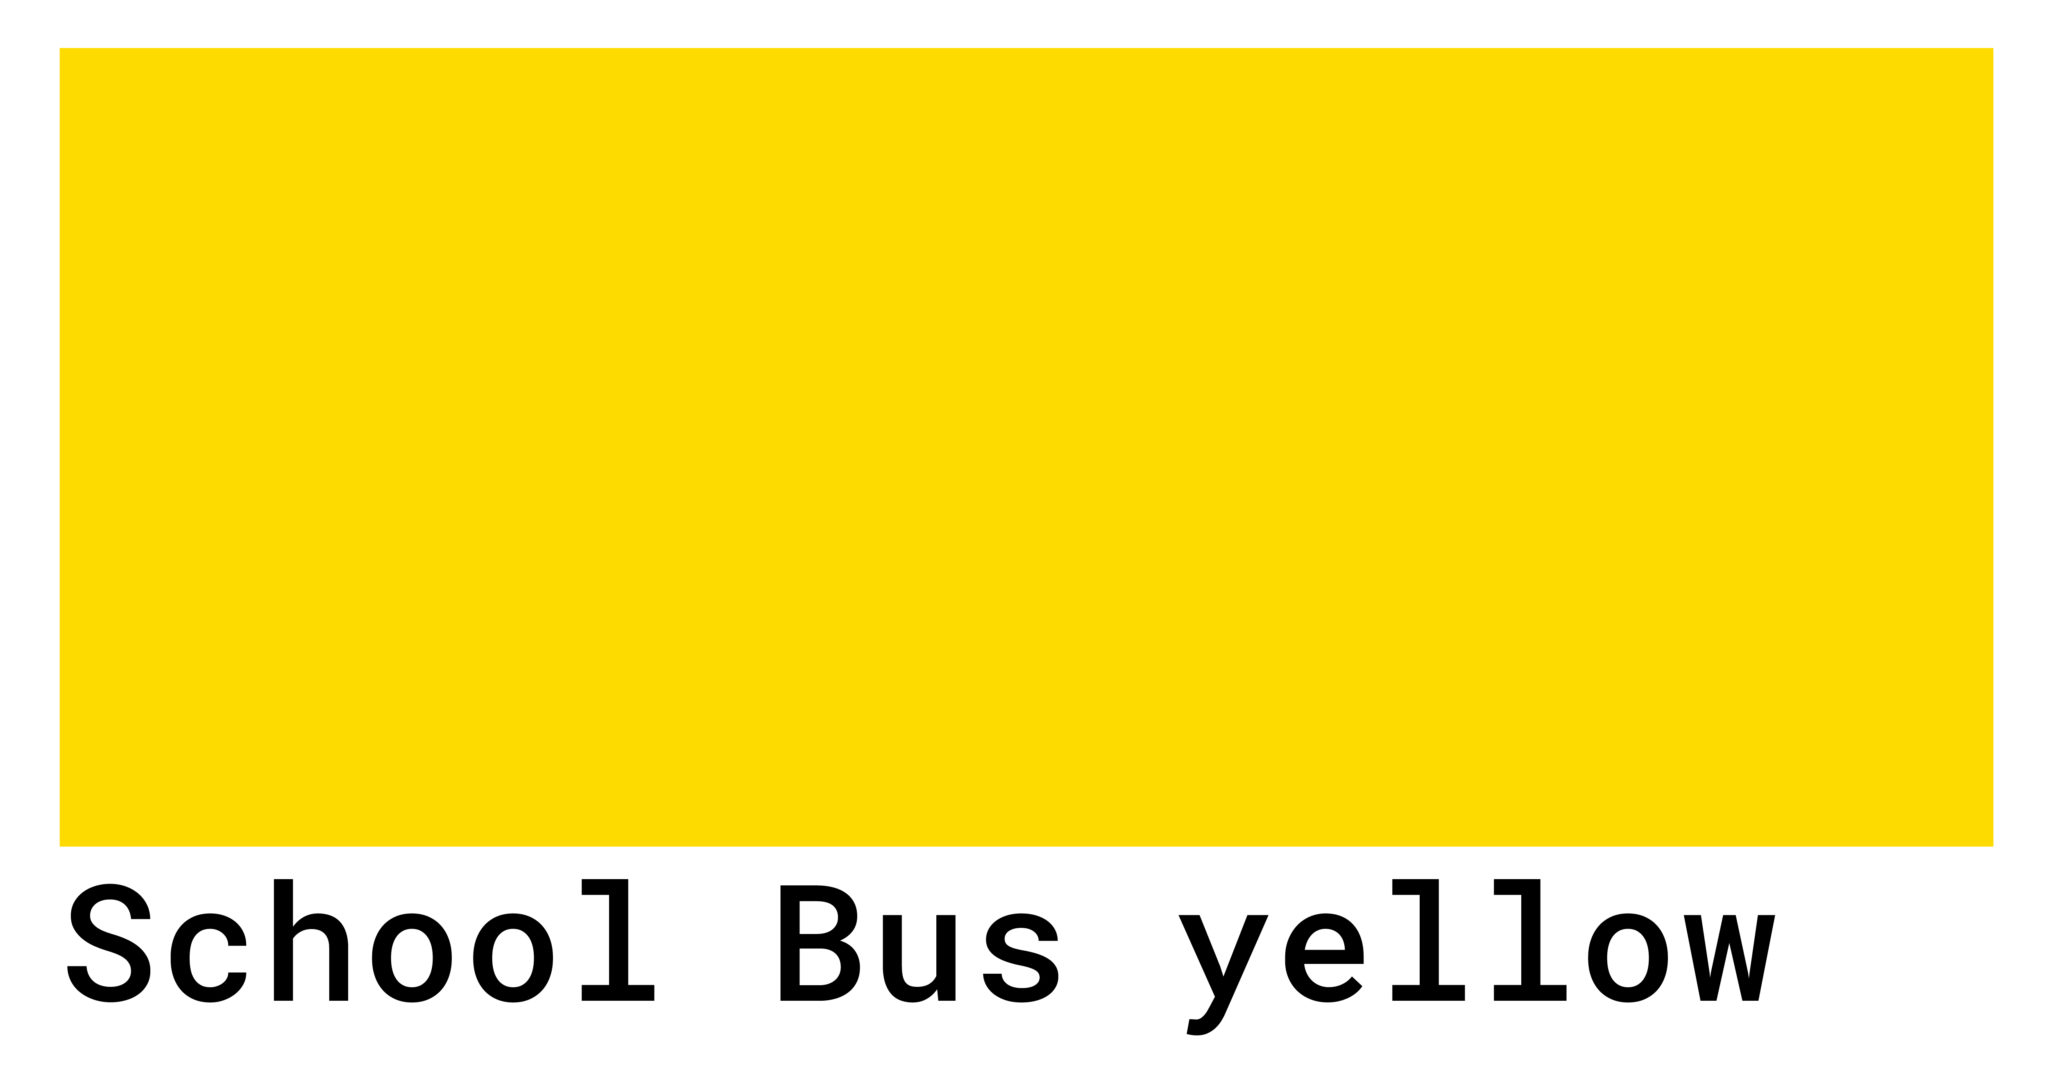 School Bus yellow Color Codes - The Hex, RGB and CMYK Values That You Need